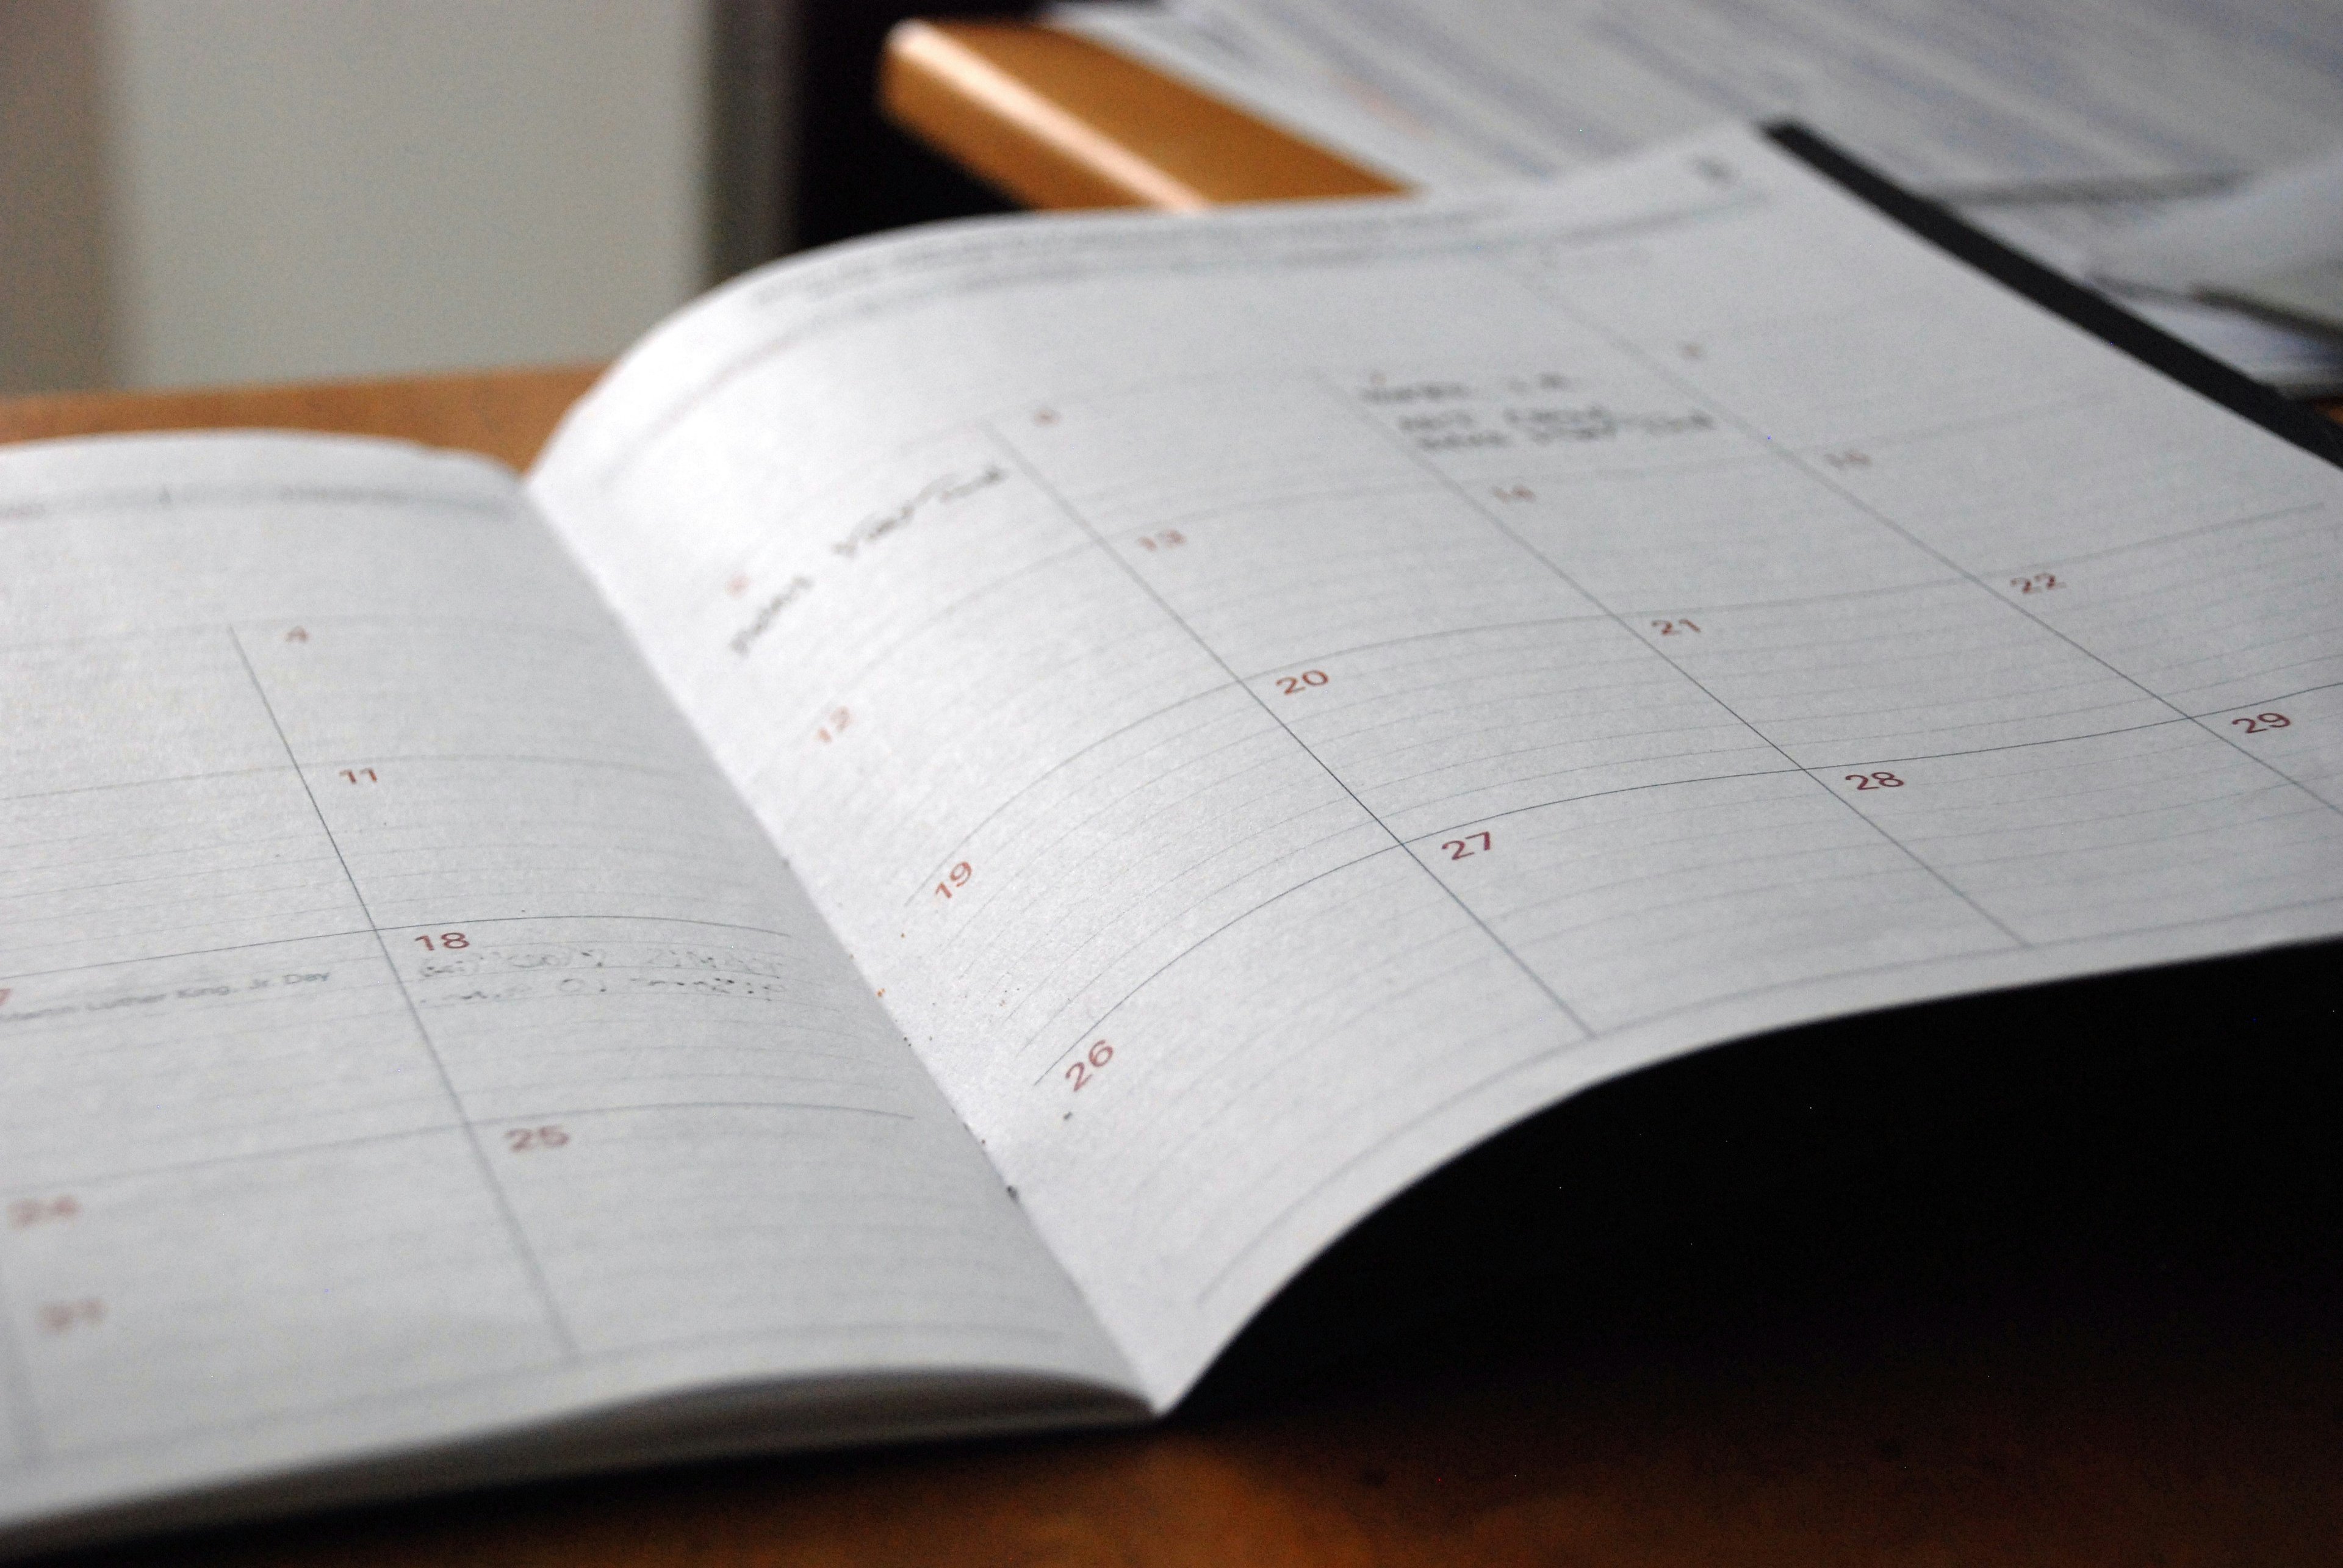 An open planner showing days of the month.